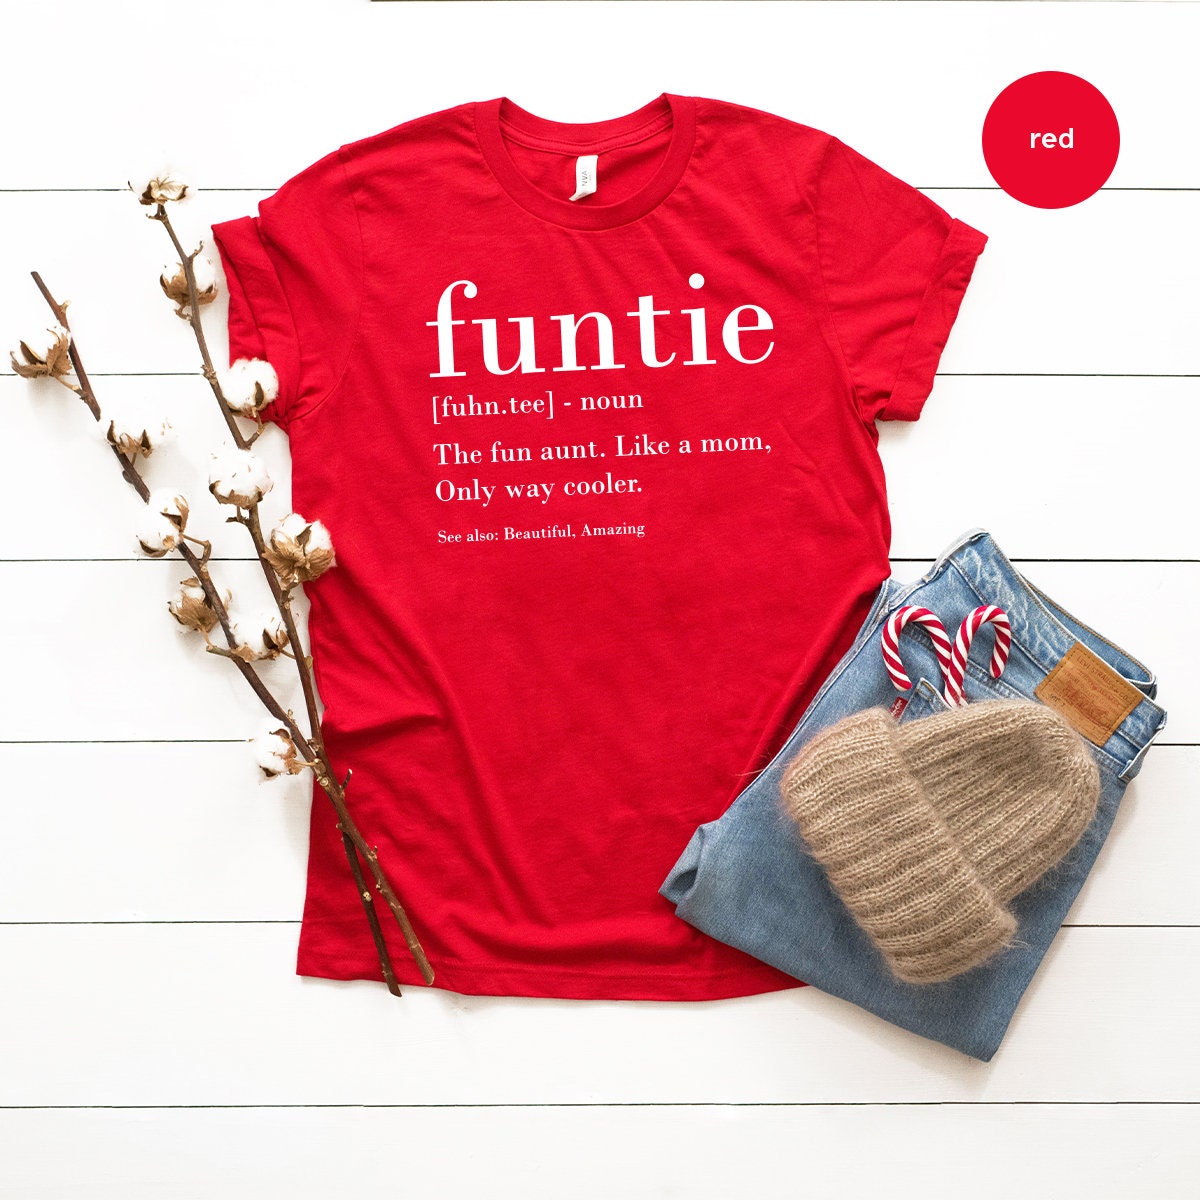 Funtie Definition Shirt, Auntie Shirts, Aunt T Shirt, Mother's Day TShirt, Gift For Aunt, Aunt Birthday Shirt, Funny Aunt Tee, Aunt Gift ZW - Fastdeliverytees.com